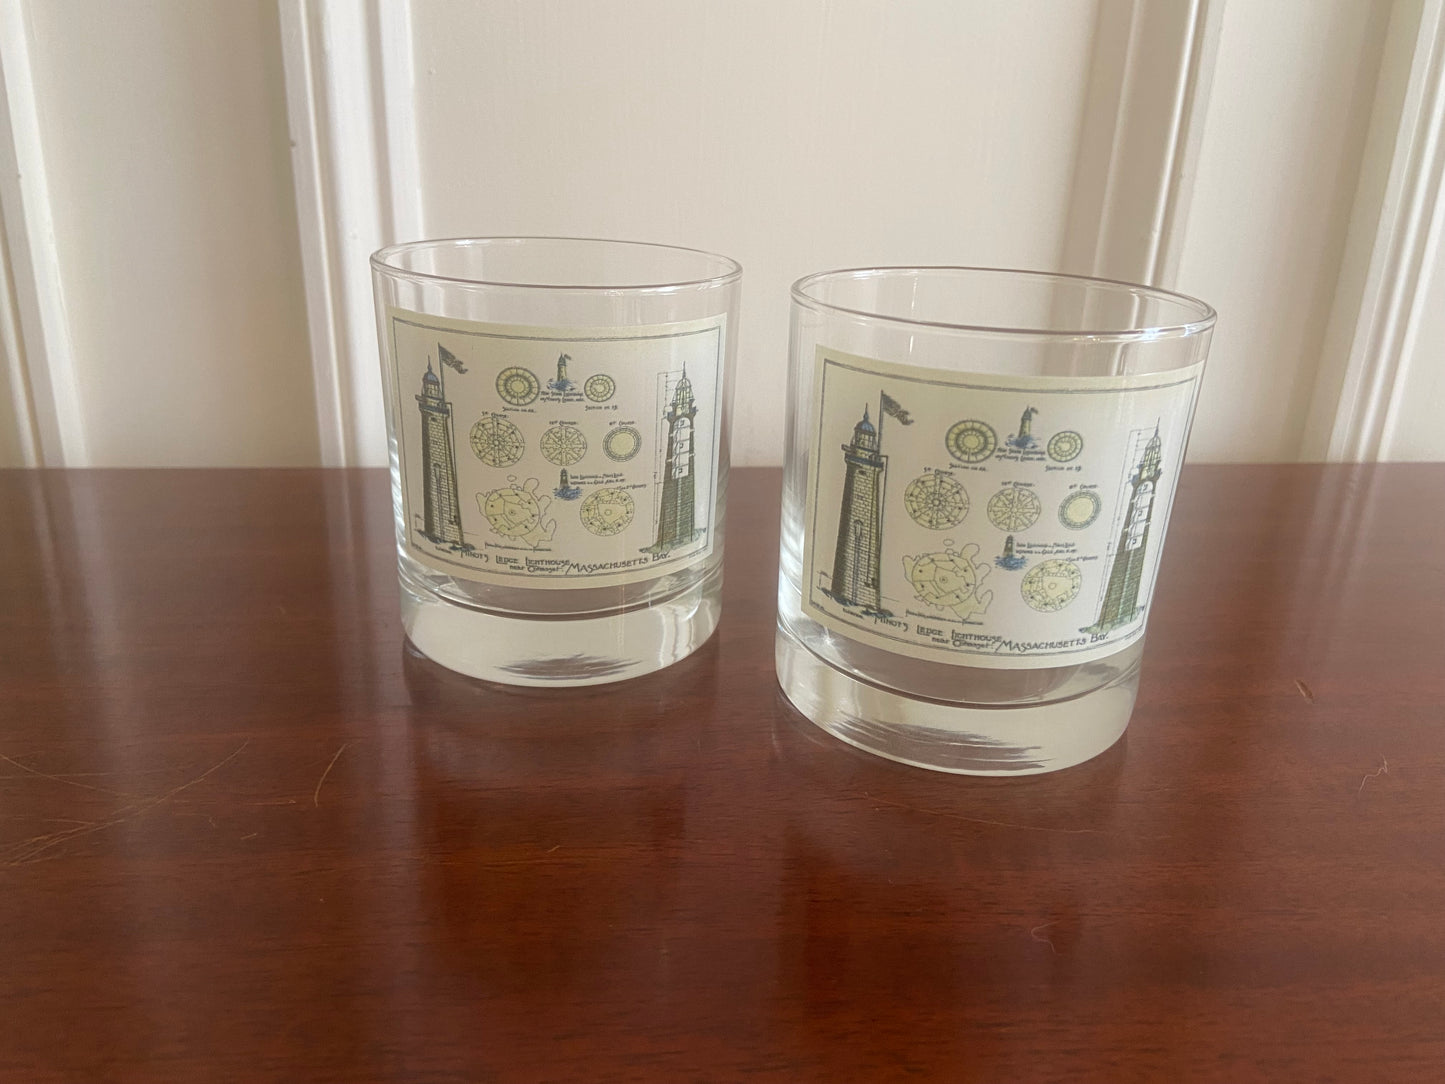 Minot Light Rocks Glass Sets Of (2) And (4) Glasses Featuring Famous Lighthouse's Architectural Diagram